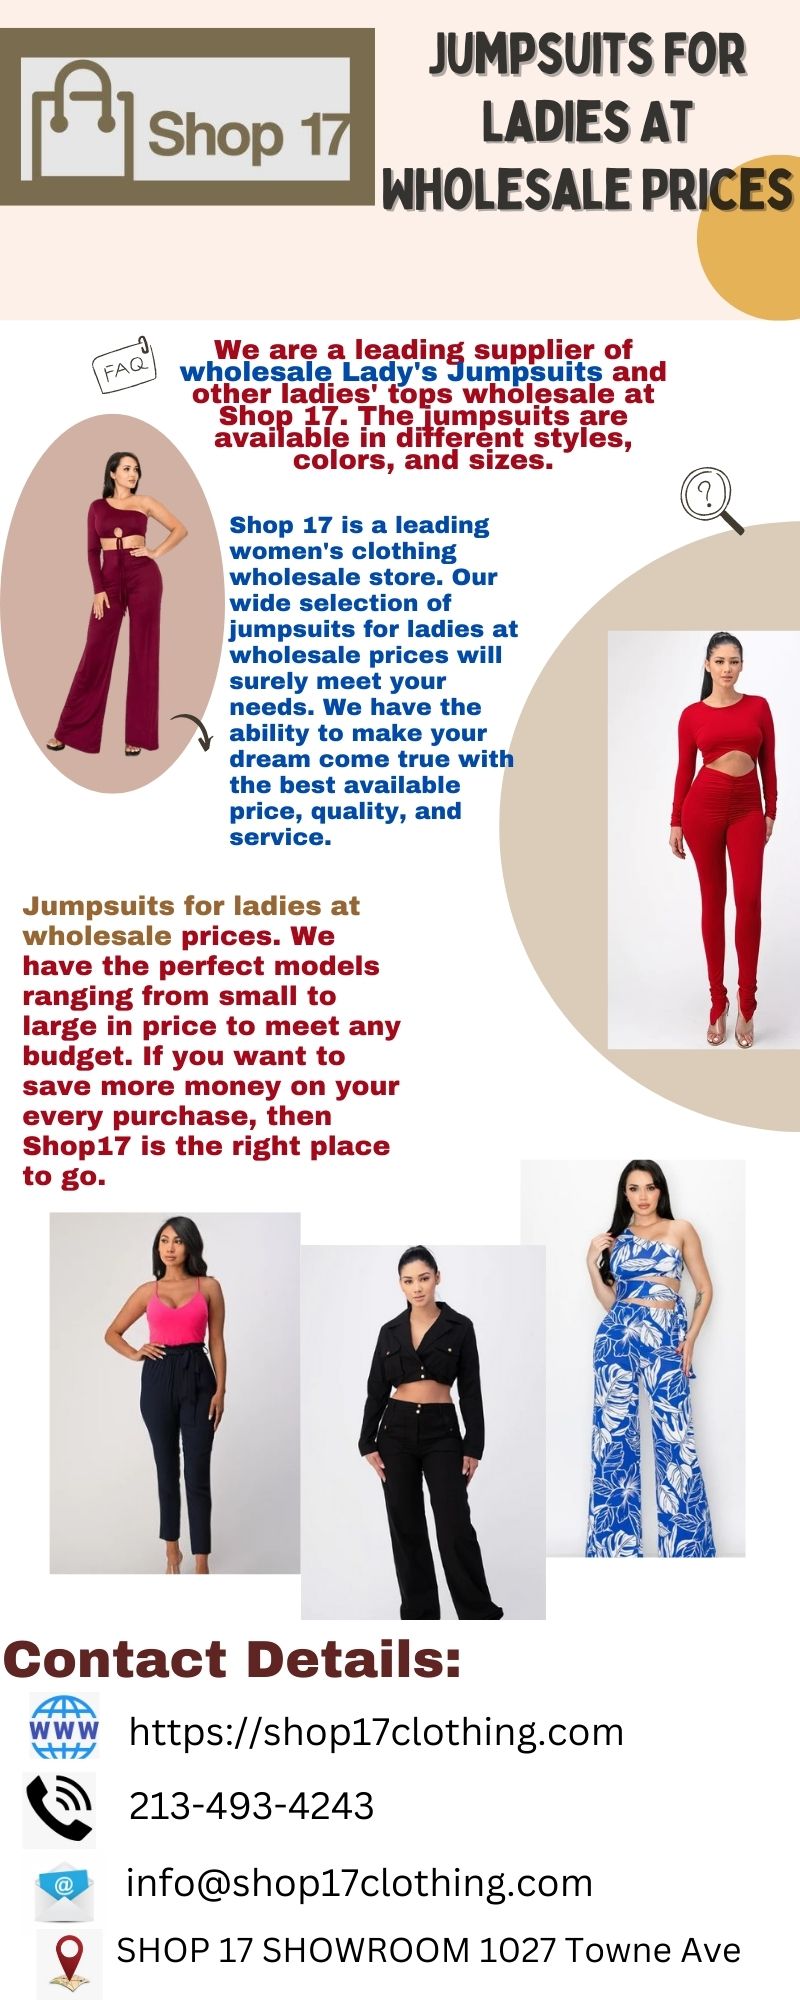 Jumpsuits For Ladies At Wholesale Prices